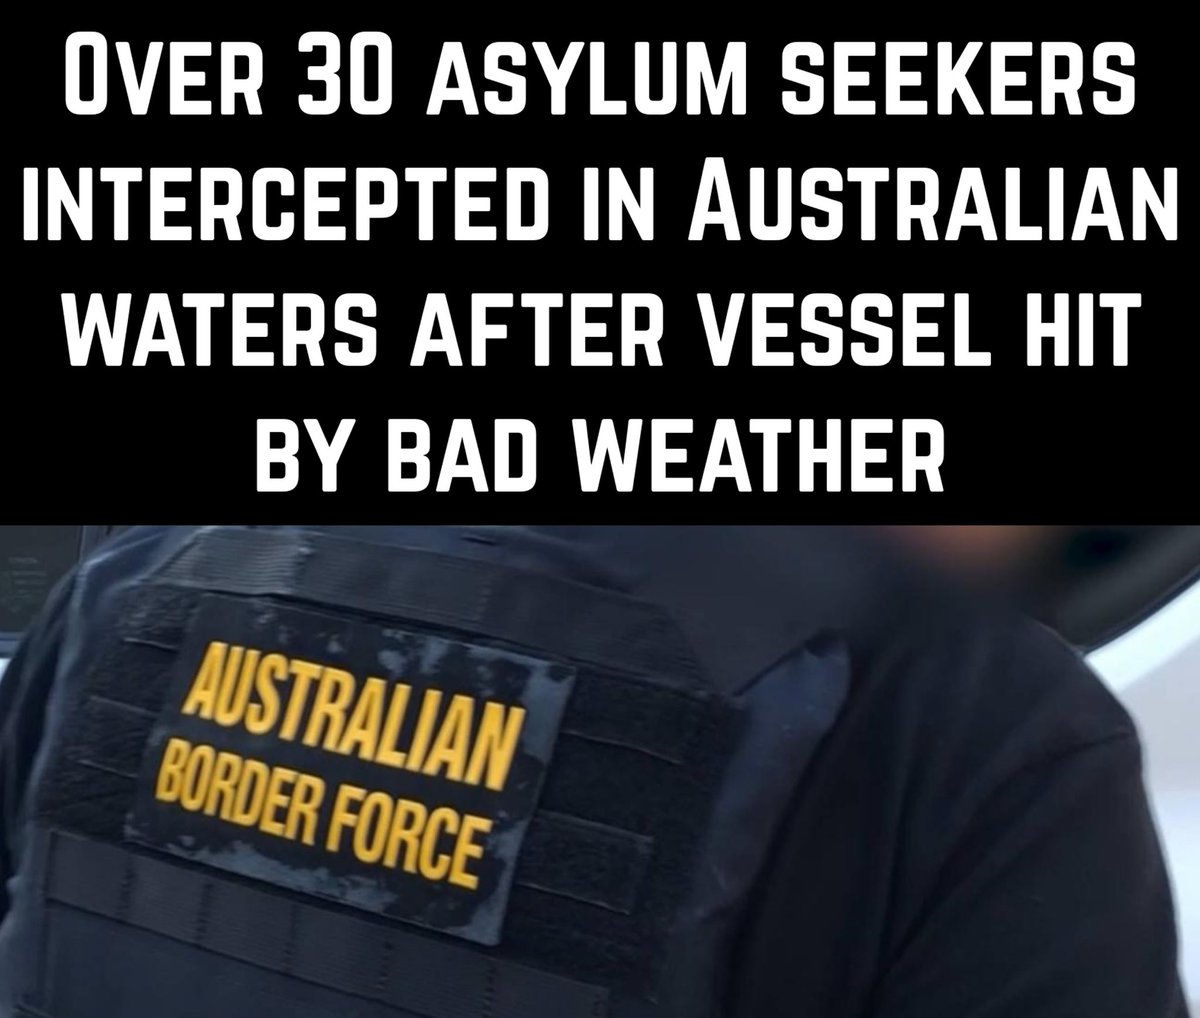 🚨A group of 33 suspected asylum seekers were rescued after their boat was destroyed by bad weather in Australian waters.  A spokesman for Home Affairs Minister Clare O’Neil said they would not comment on operational matters. 🚨 A group of 33 suspected asylum seekers were…